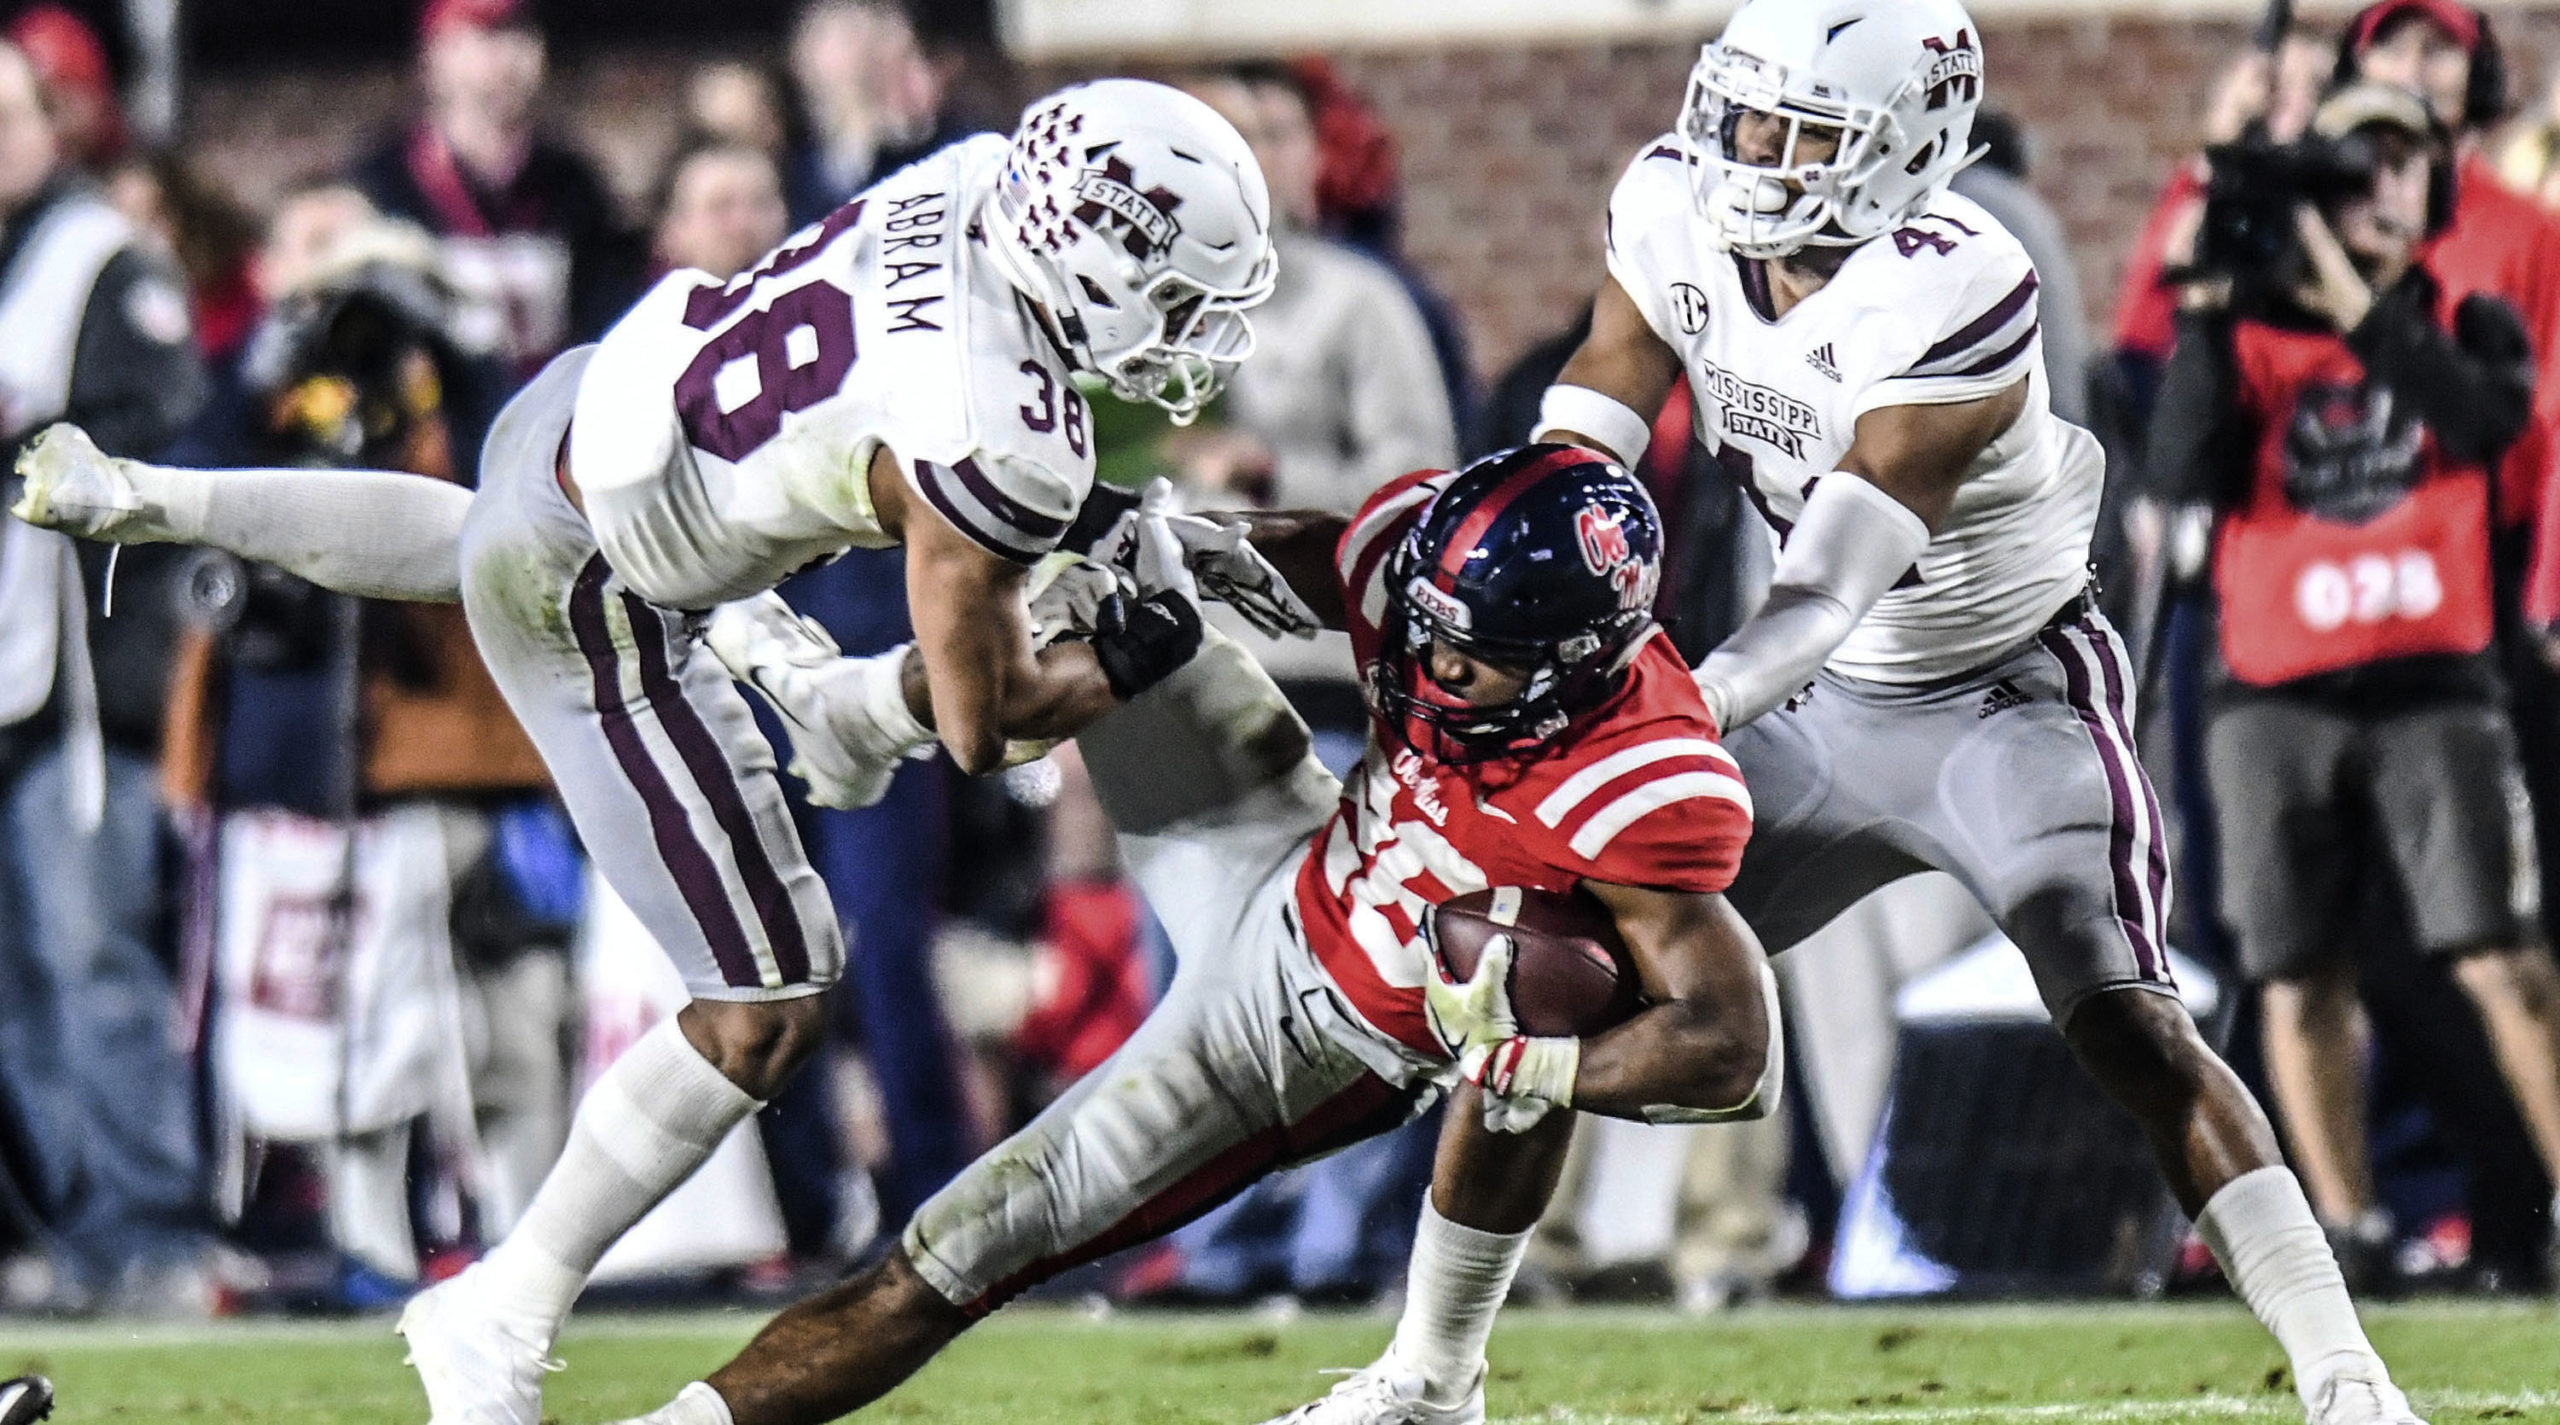 A Brawl Took Place During Mississippi State-Ole Miss Game